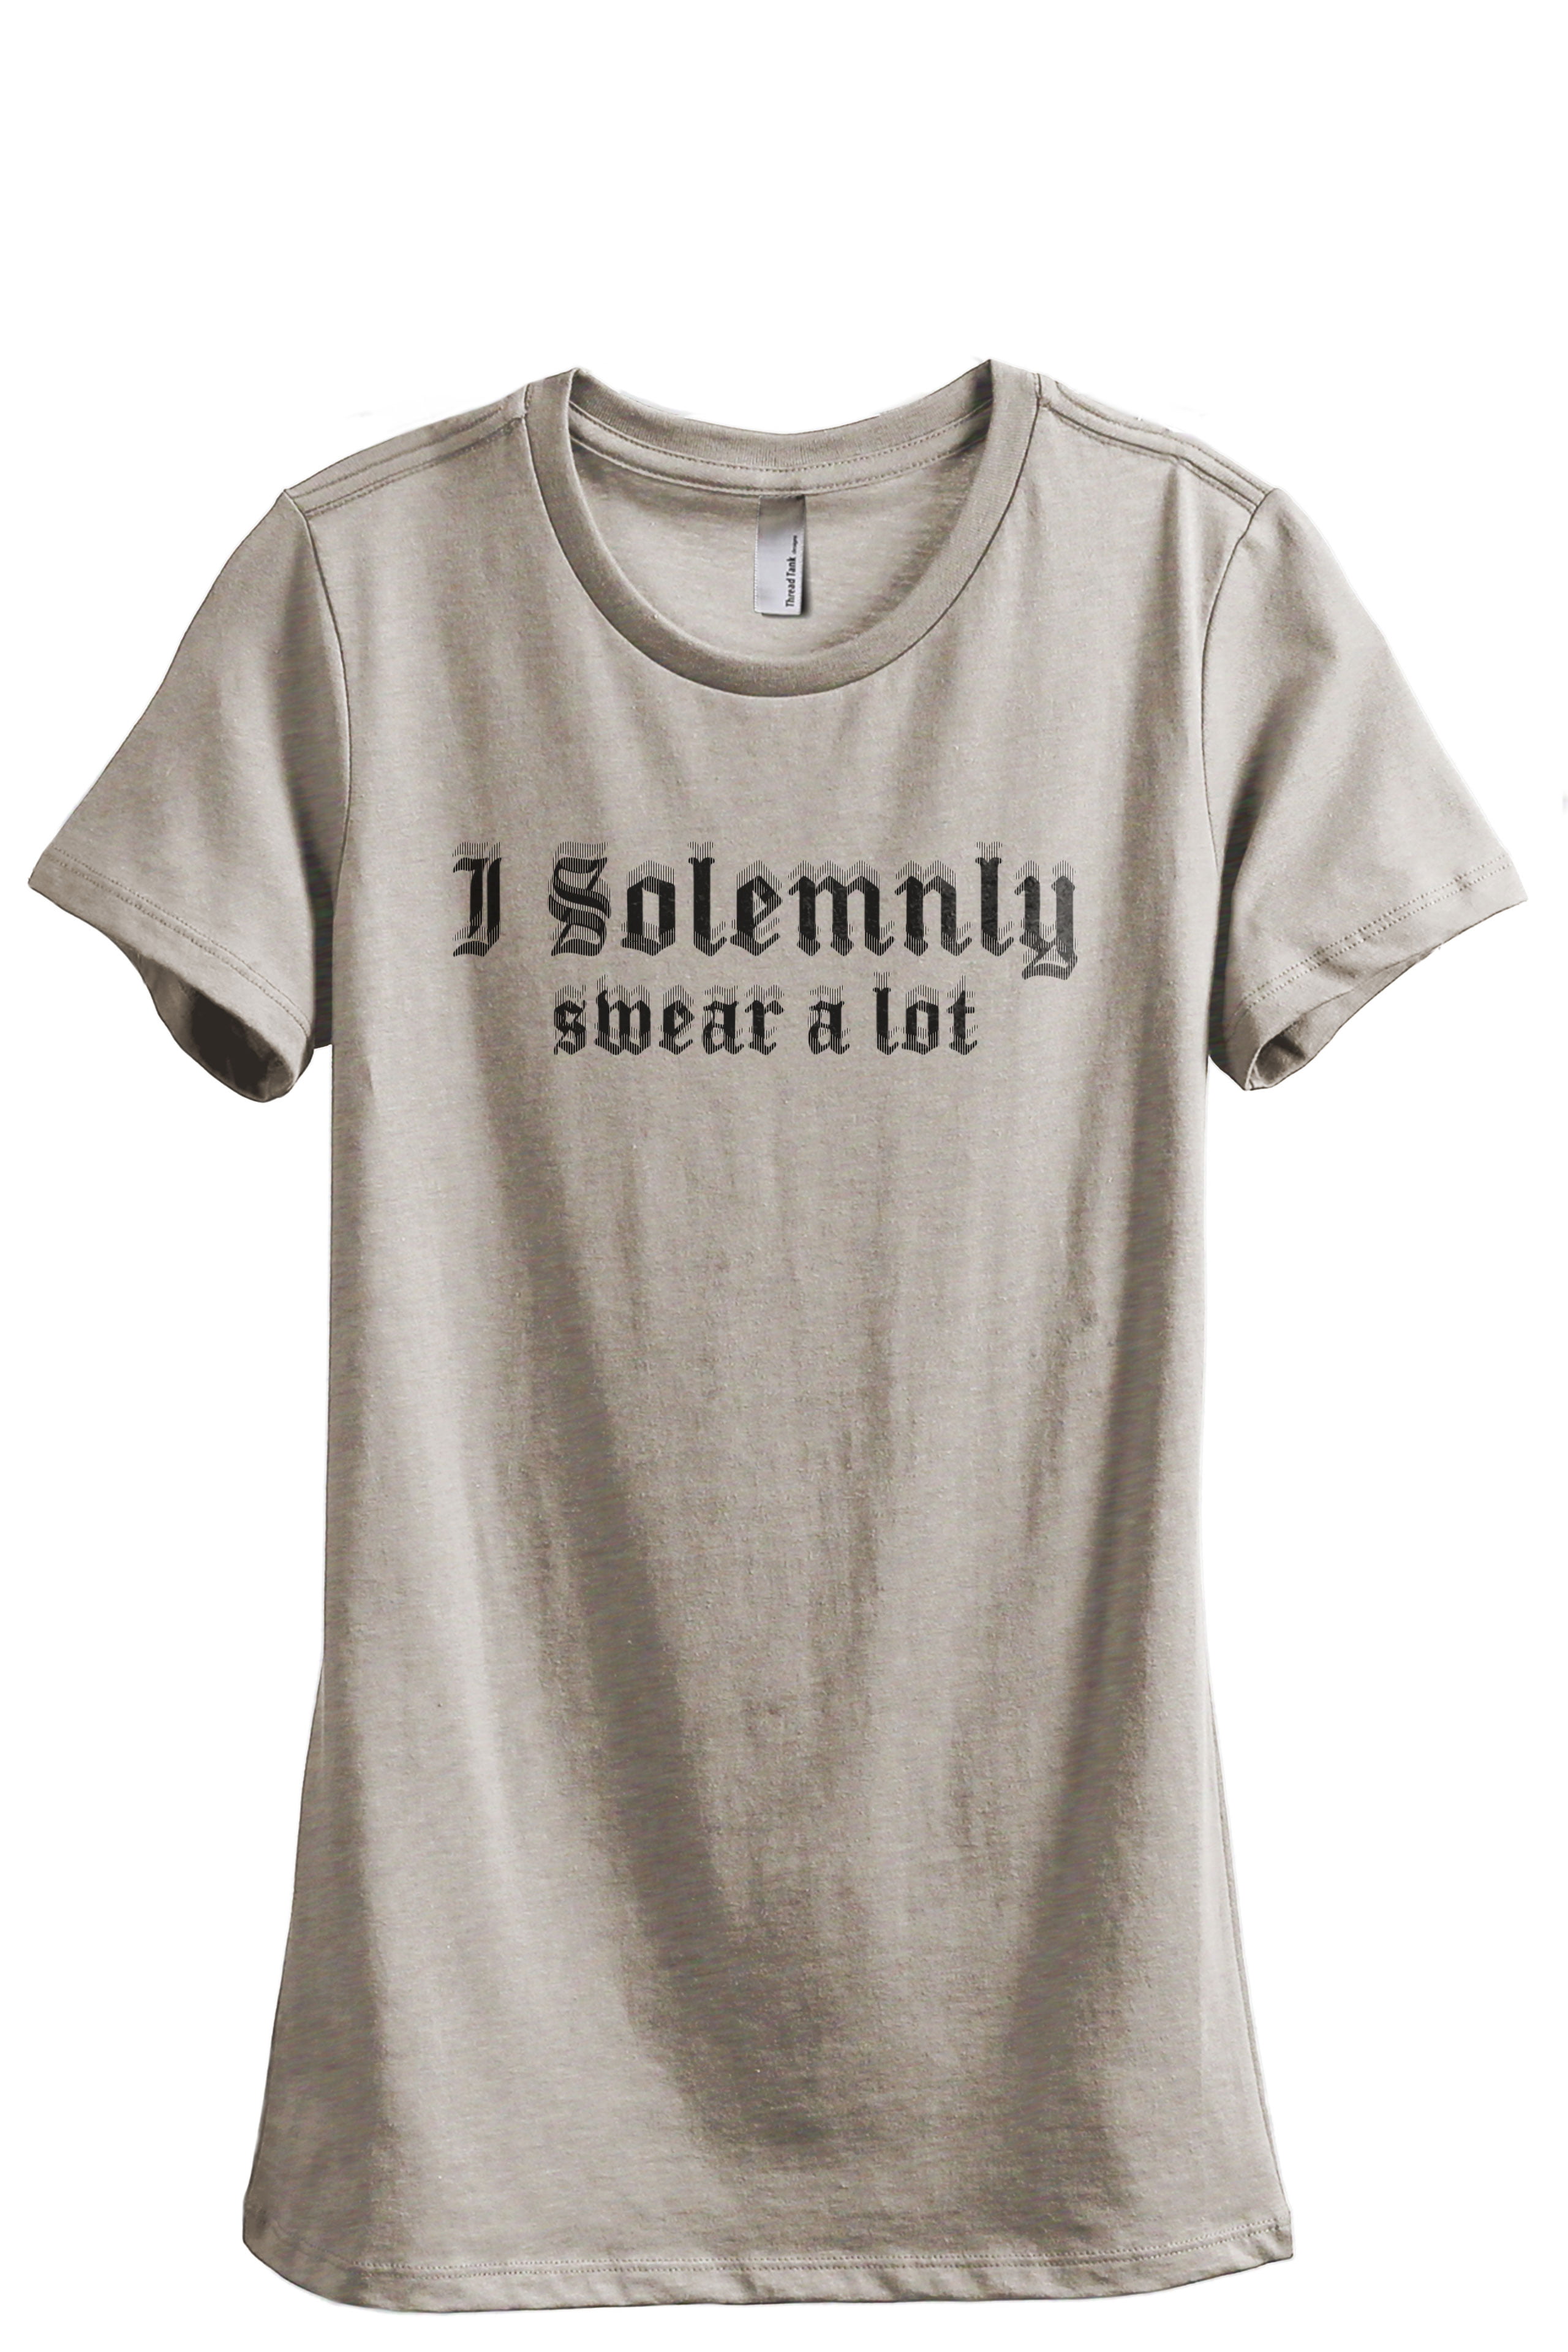 I Solemnly Swear A Lot Women's Fashion Relaxed T-Shirt Tee Heather Tan X- Large 